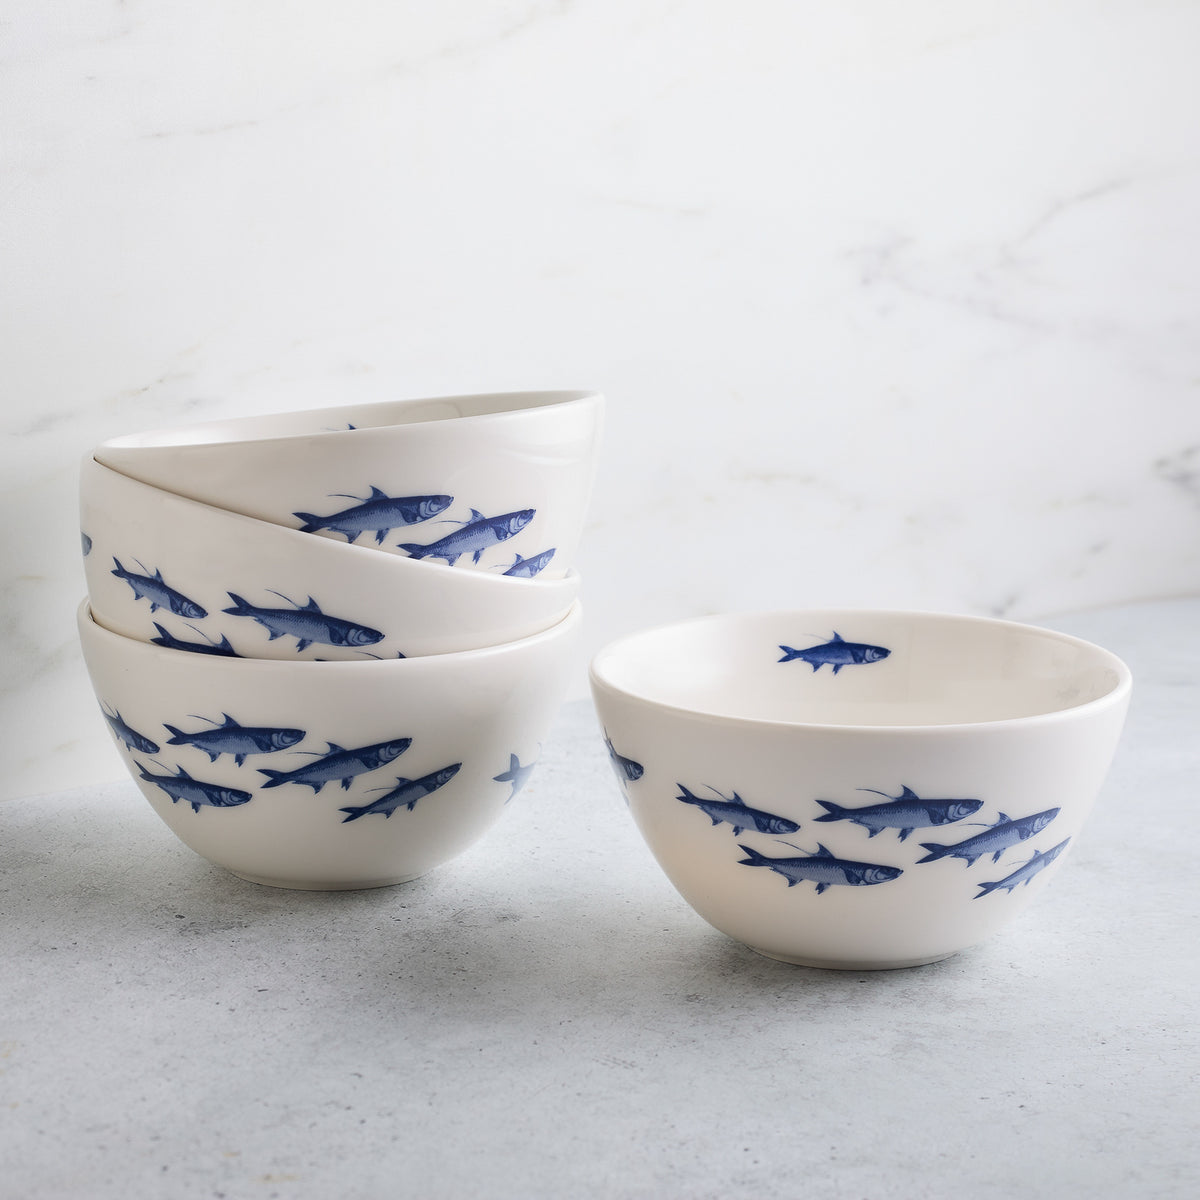 A stack of four Caskata School of Fish Cereal Bowls, each decorated with a pattern of blue fish, makes a charming addition to any dinnerware collection.